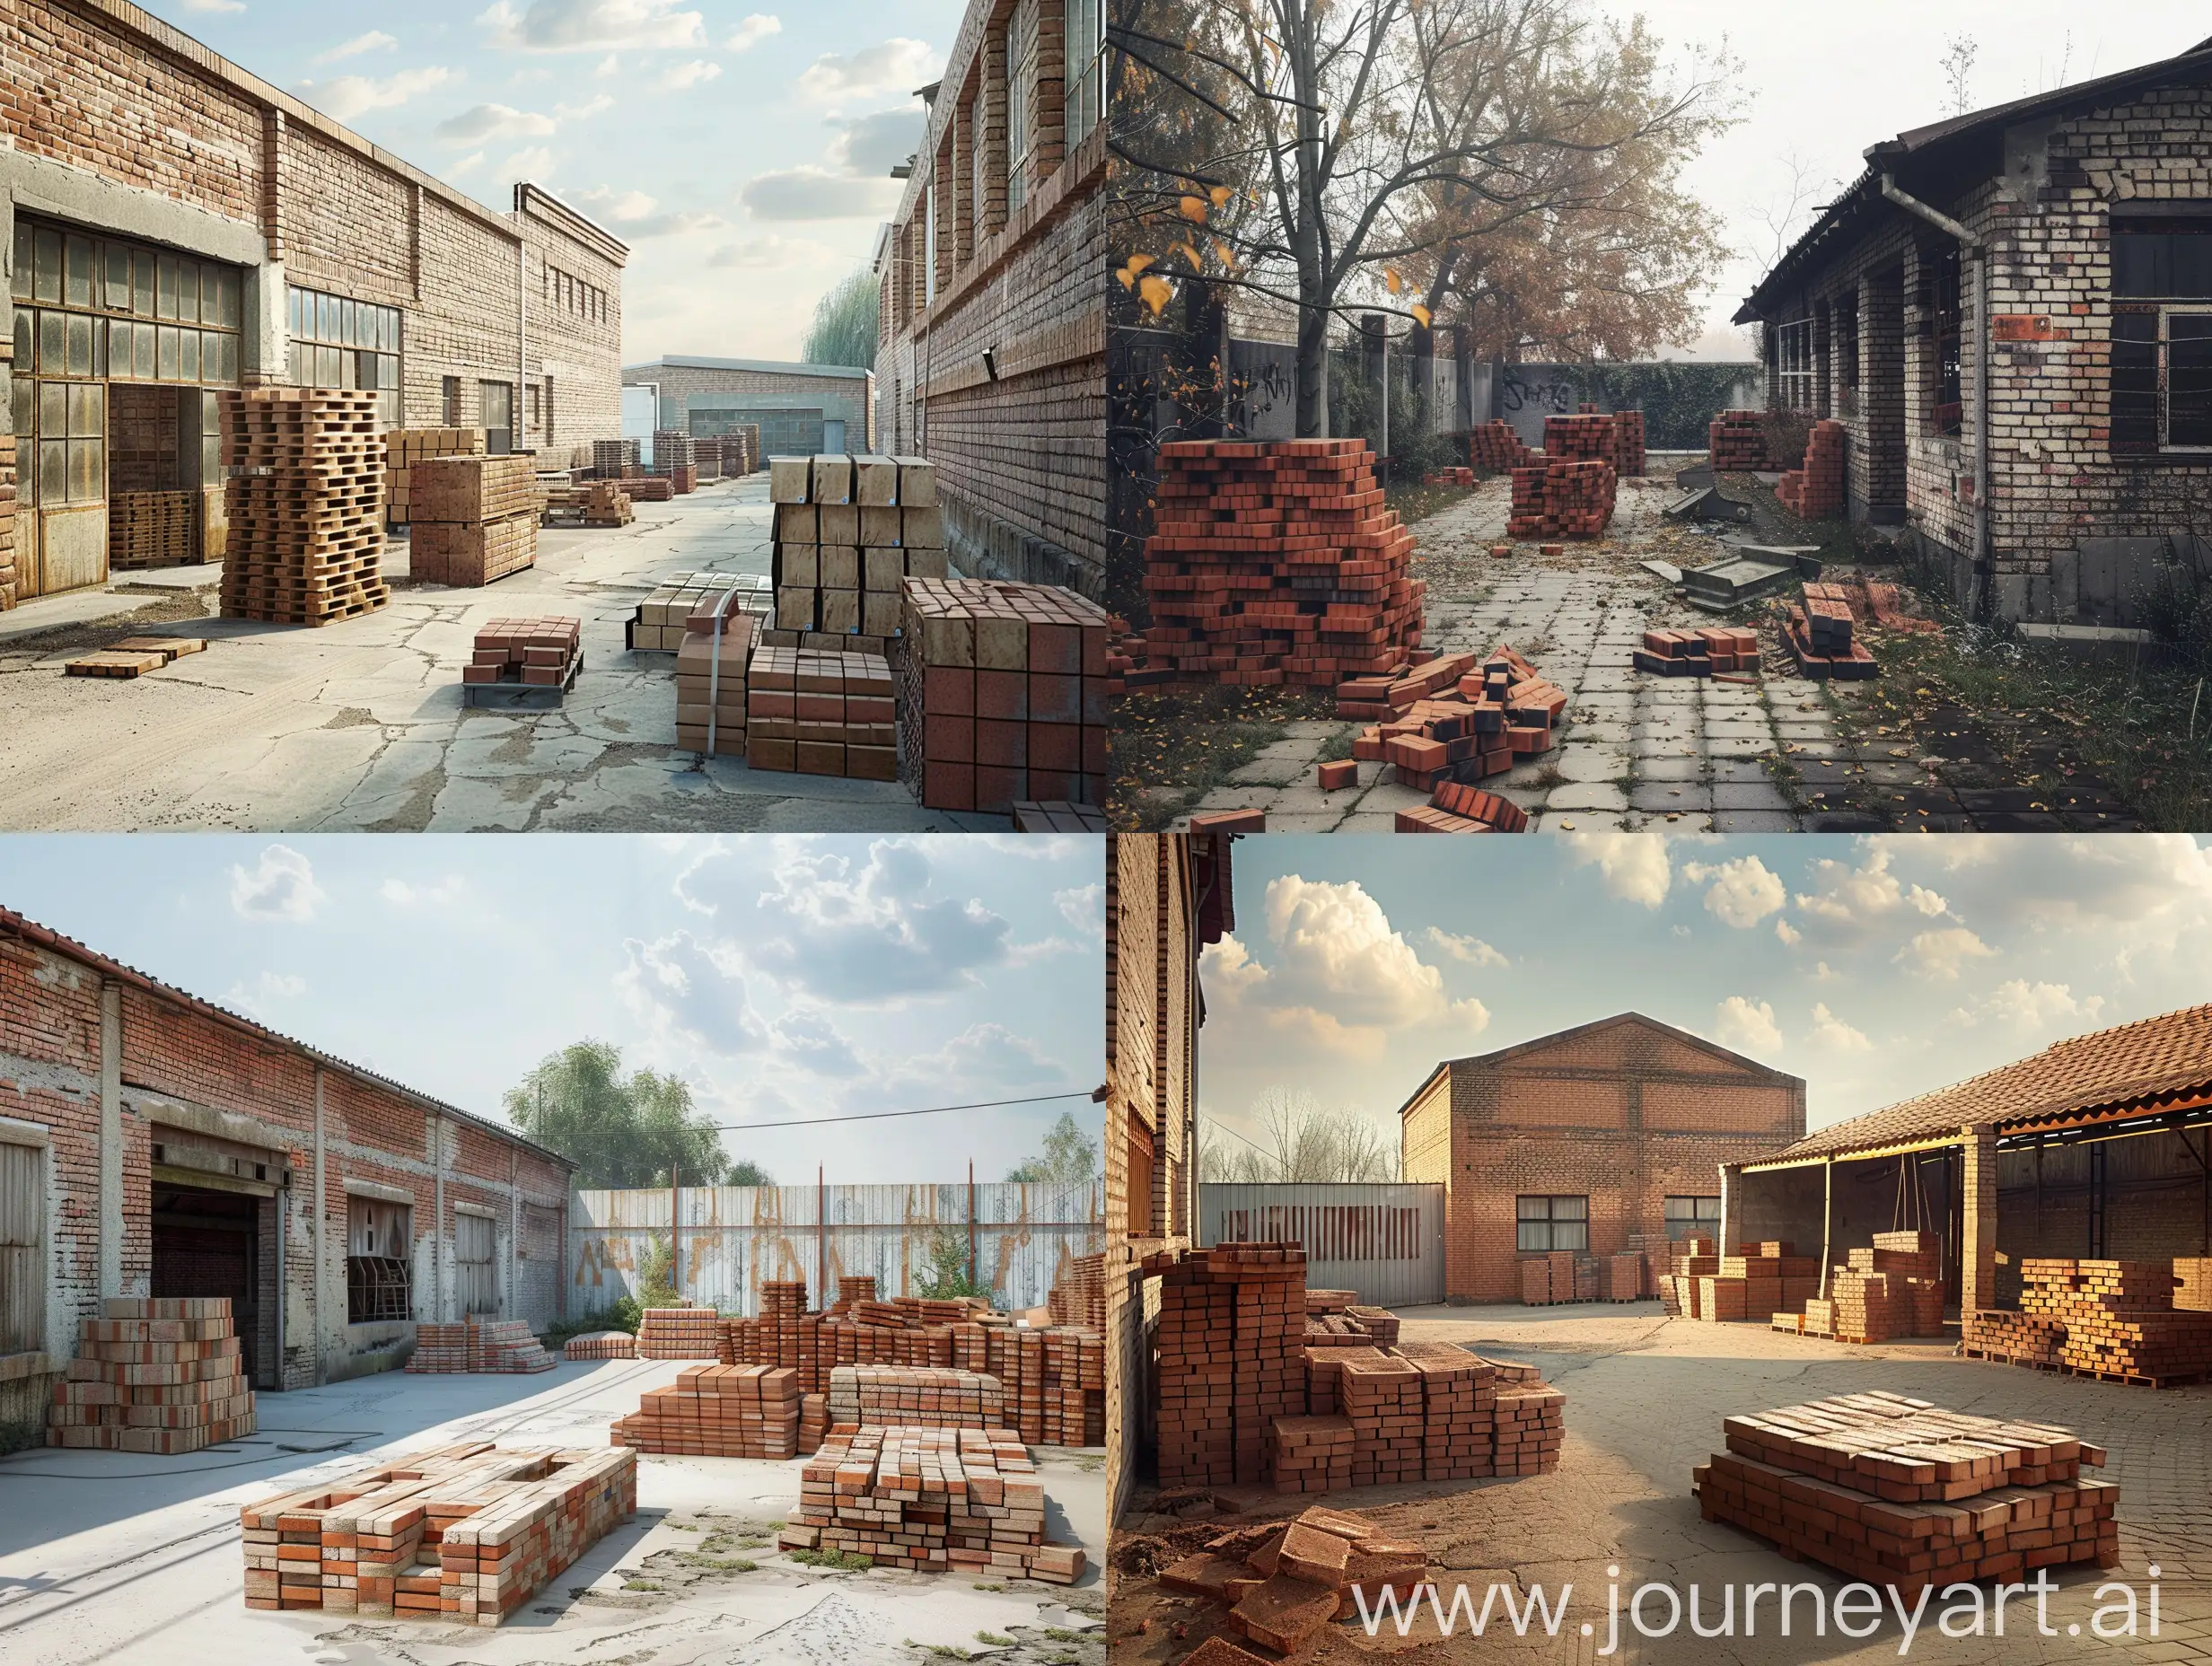 hyper realistic photo shoot of a brick factory from outside, also there are some stacks of bricks placed in the yard if the factory, nice and pro